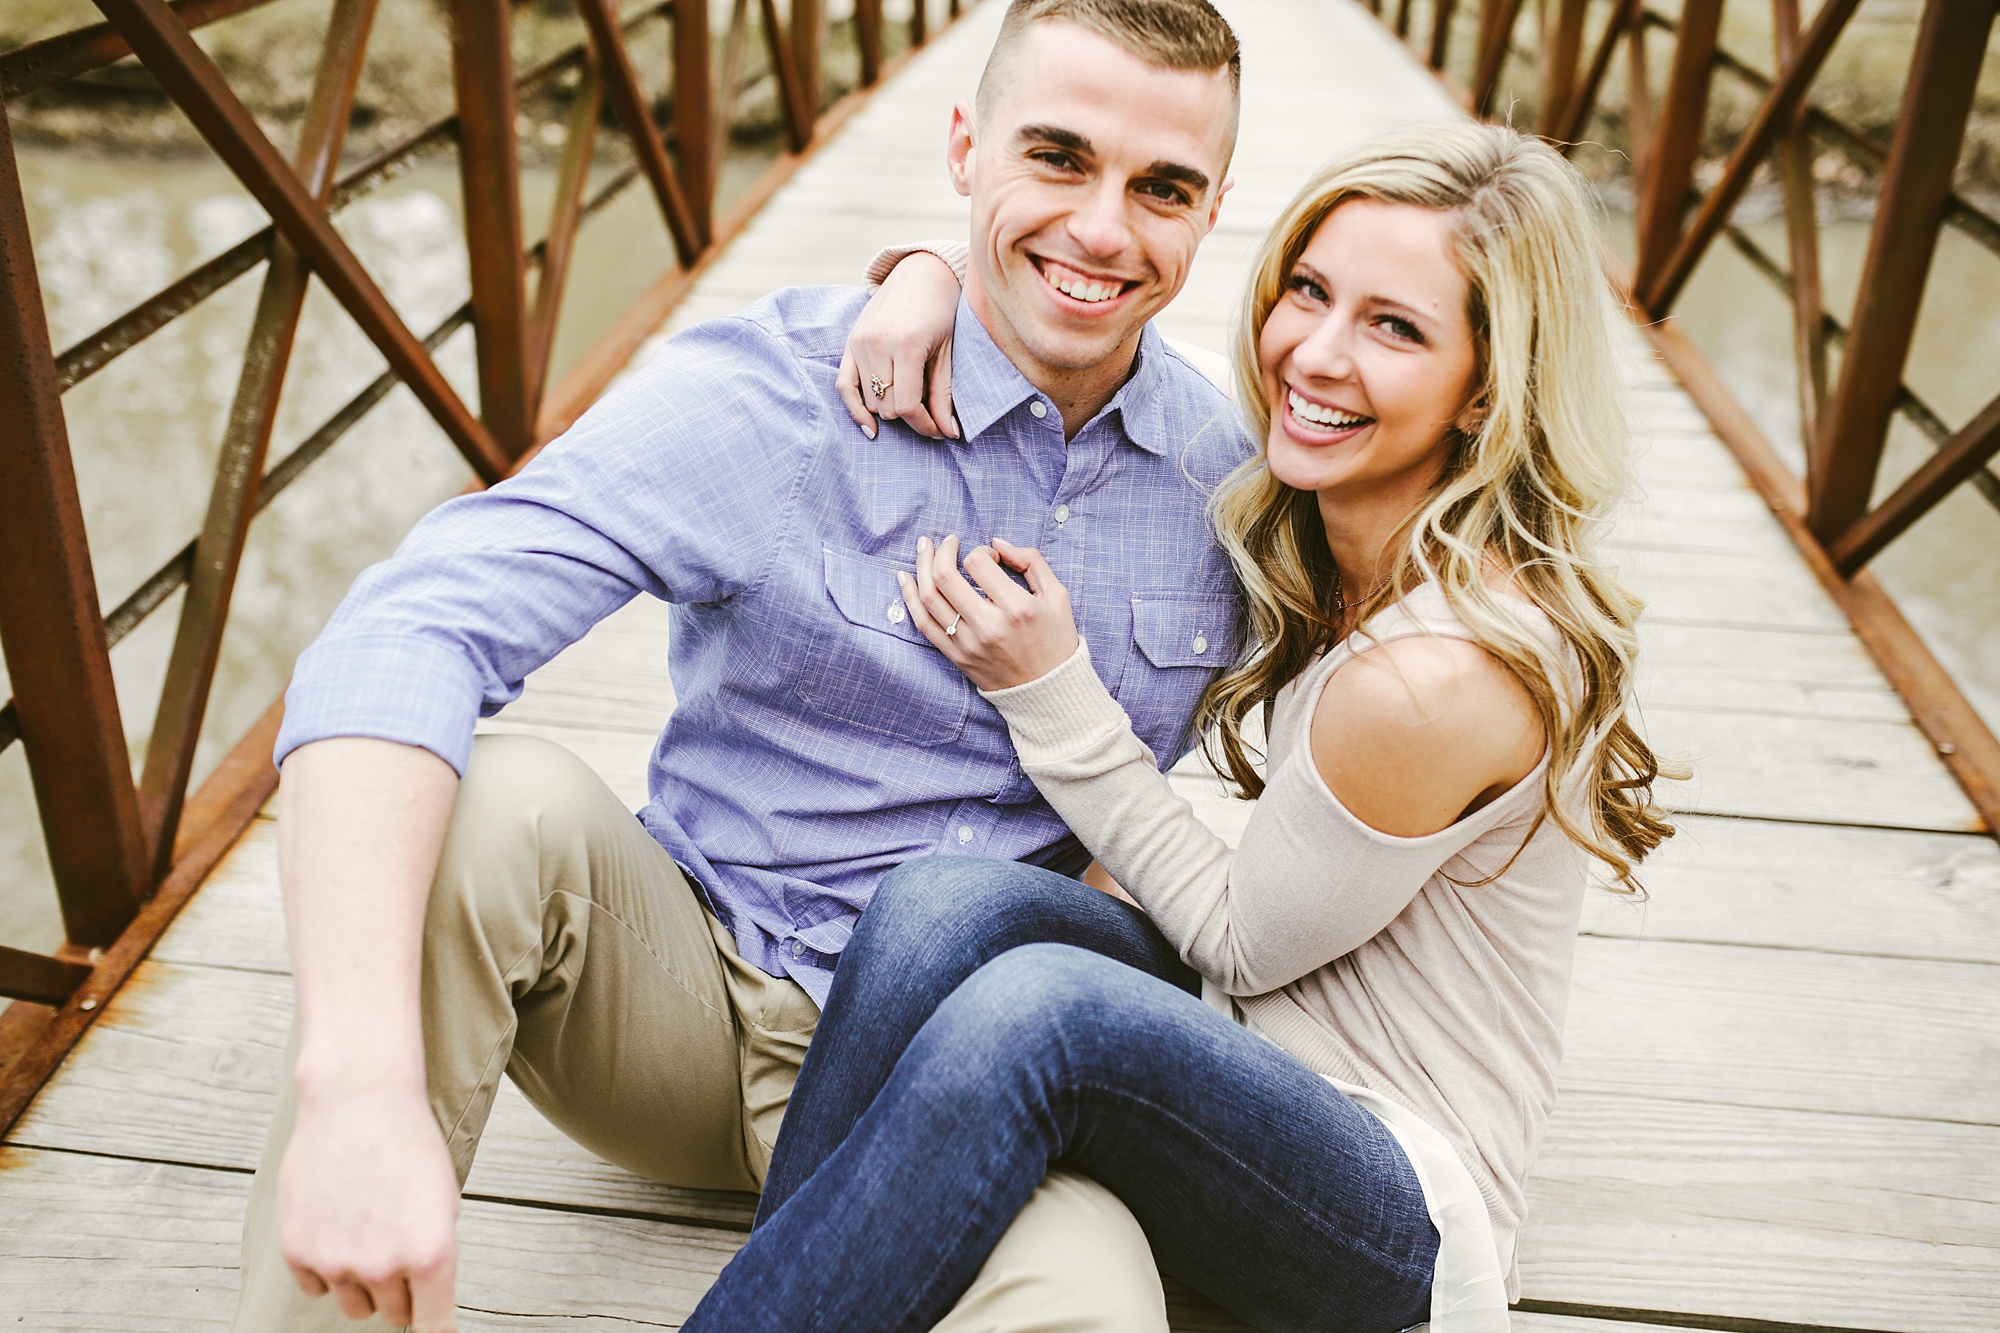 Huff Photography - Allie and Ben_0010.jpg